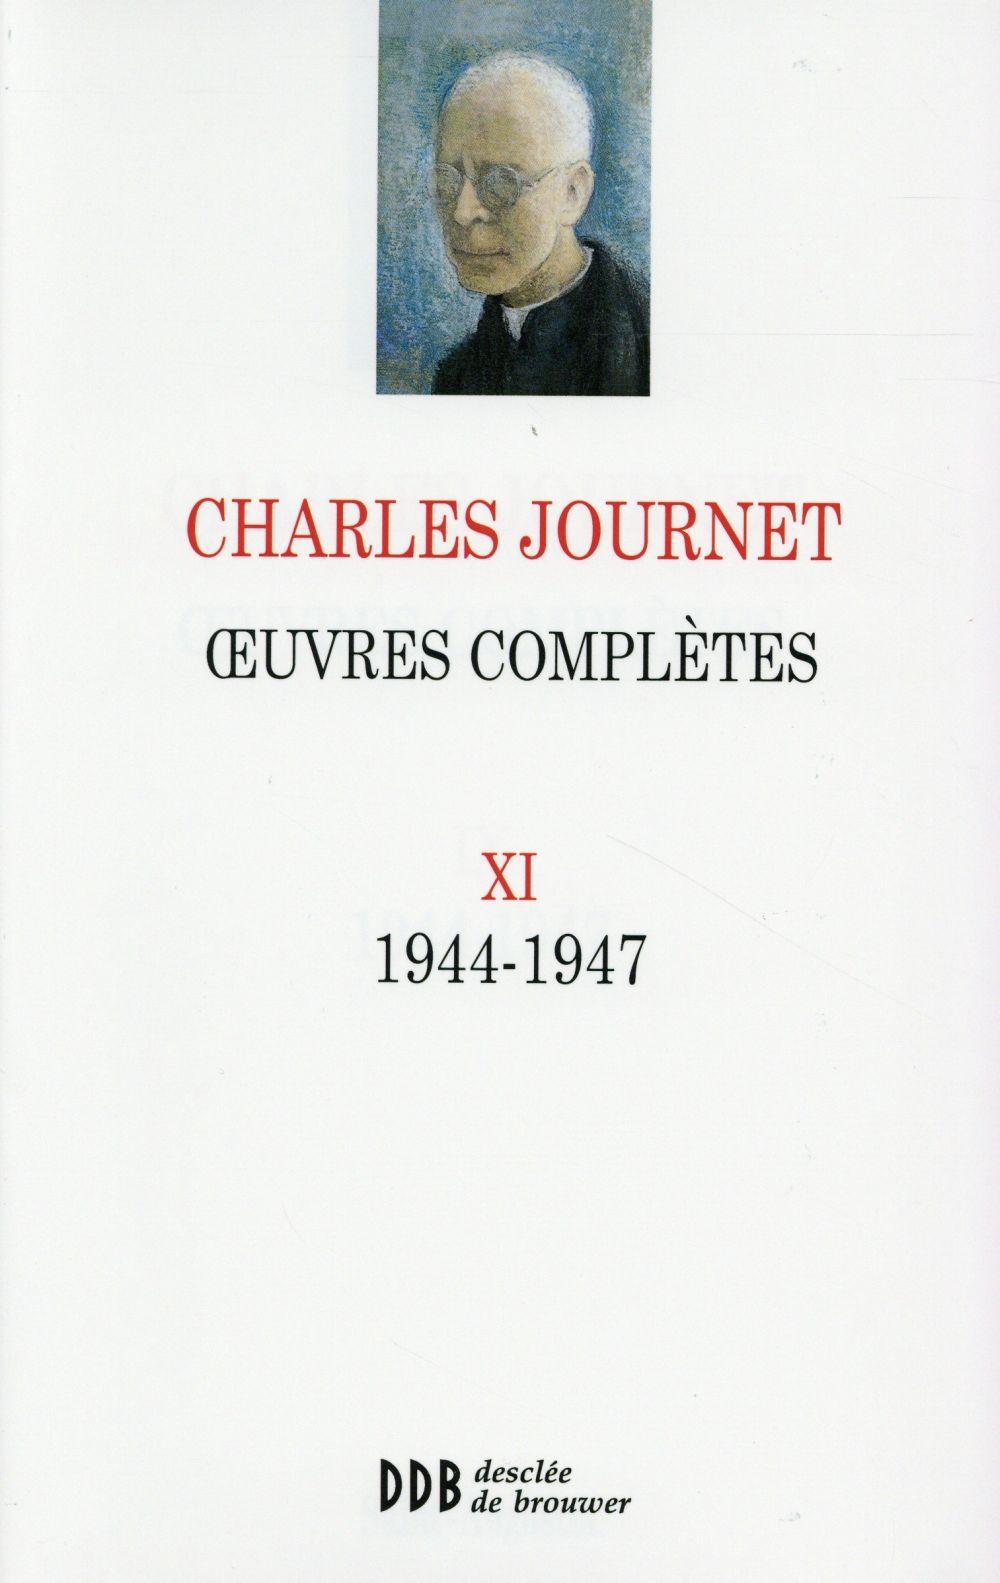 Vente Livre :                                    Oeuvres compl?tes t.11 ; 1944-1947
- Charles Journet                                     